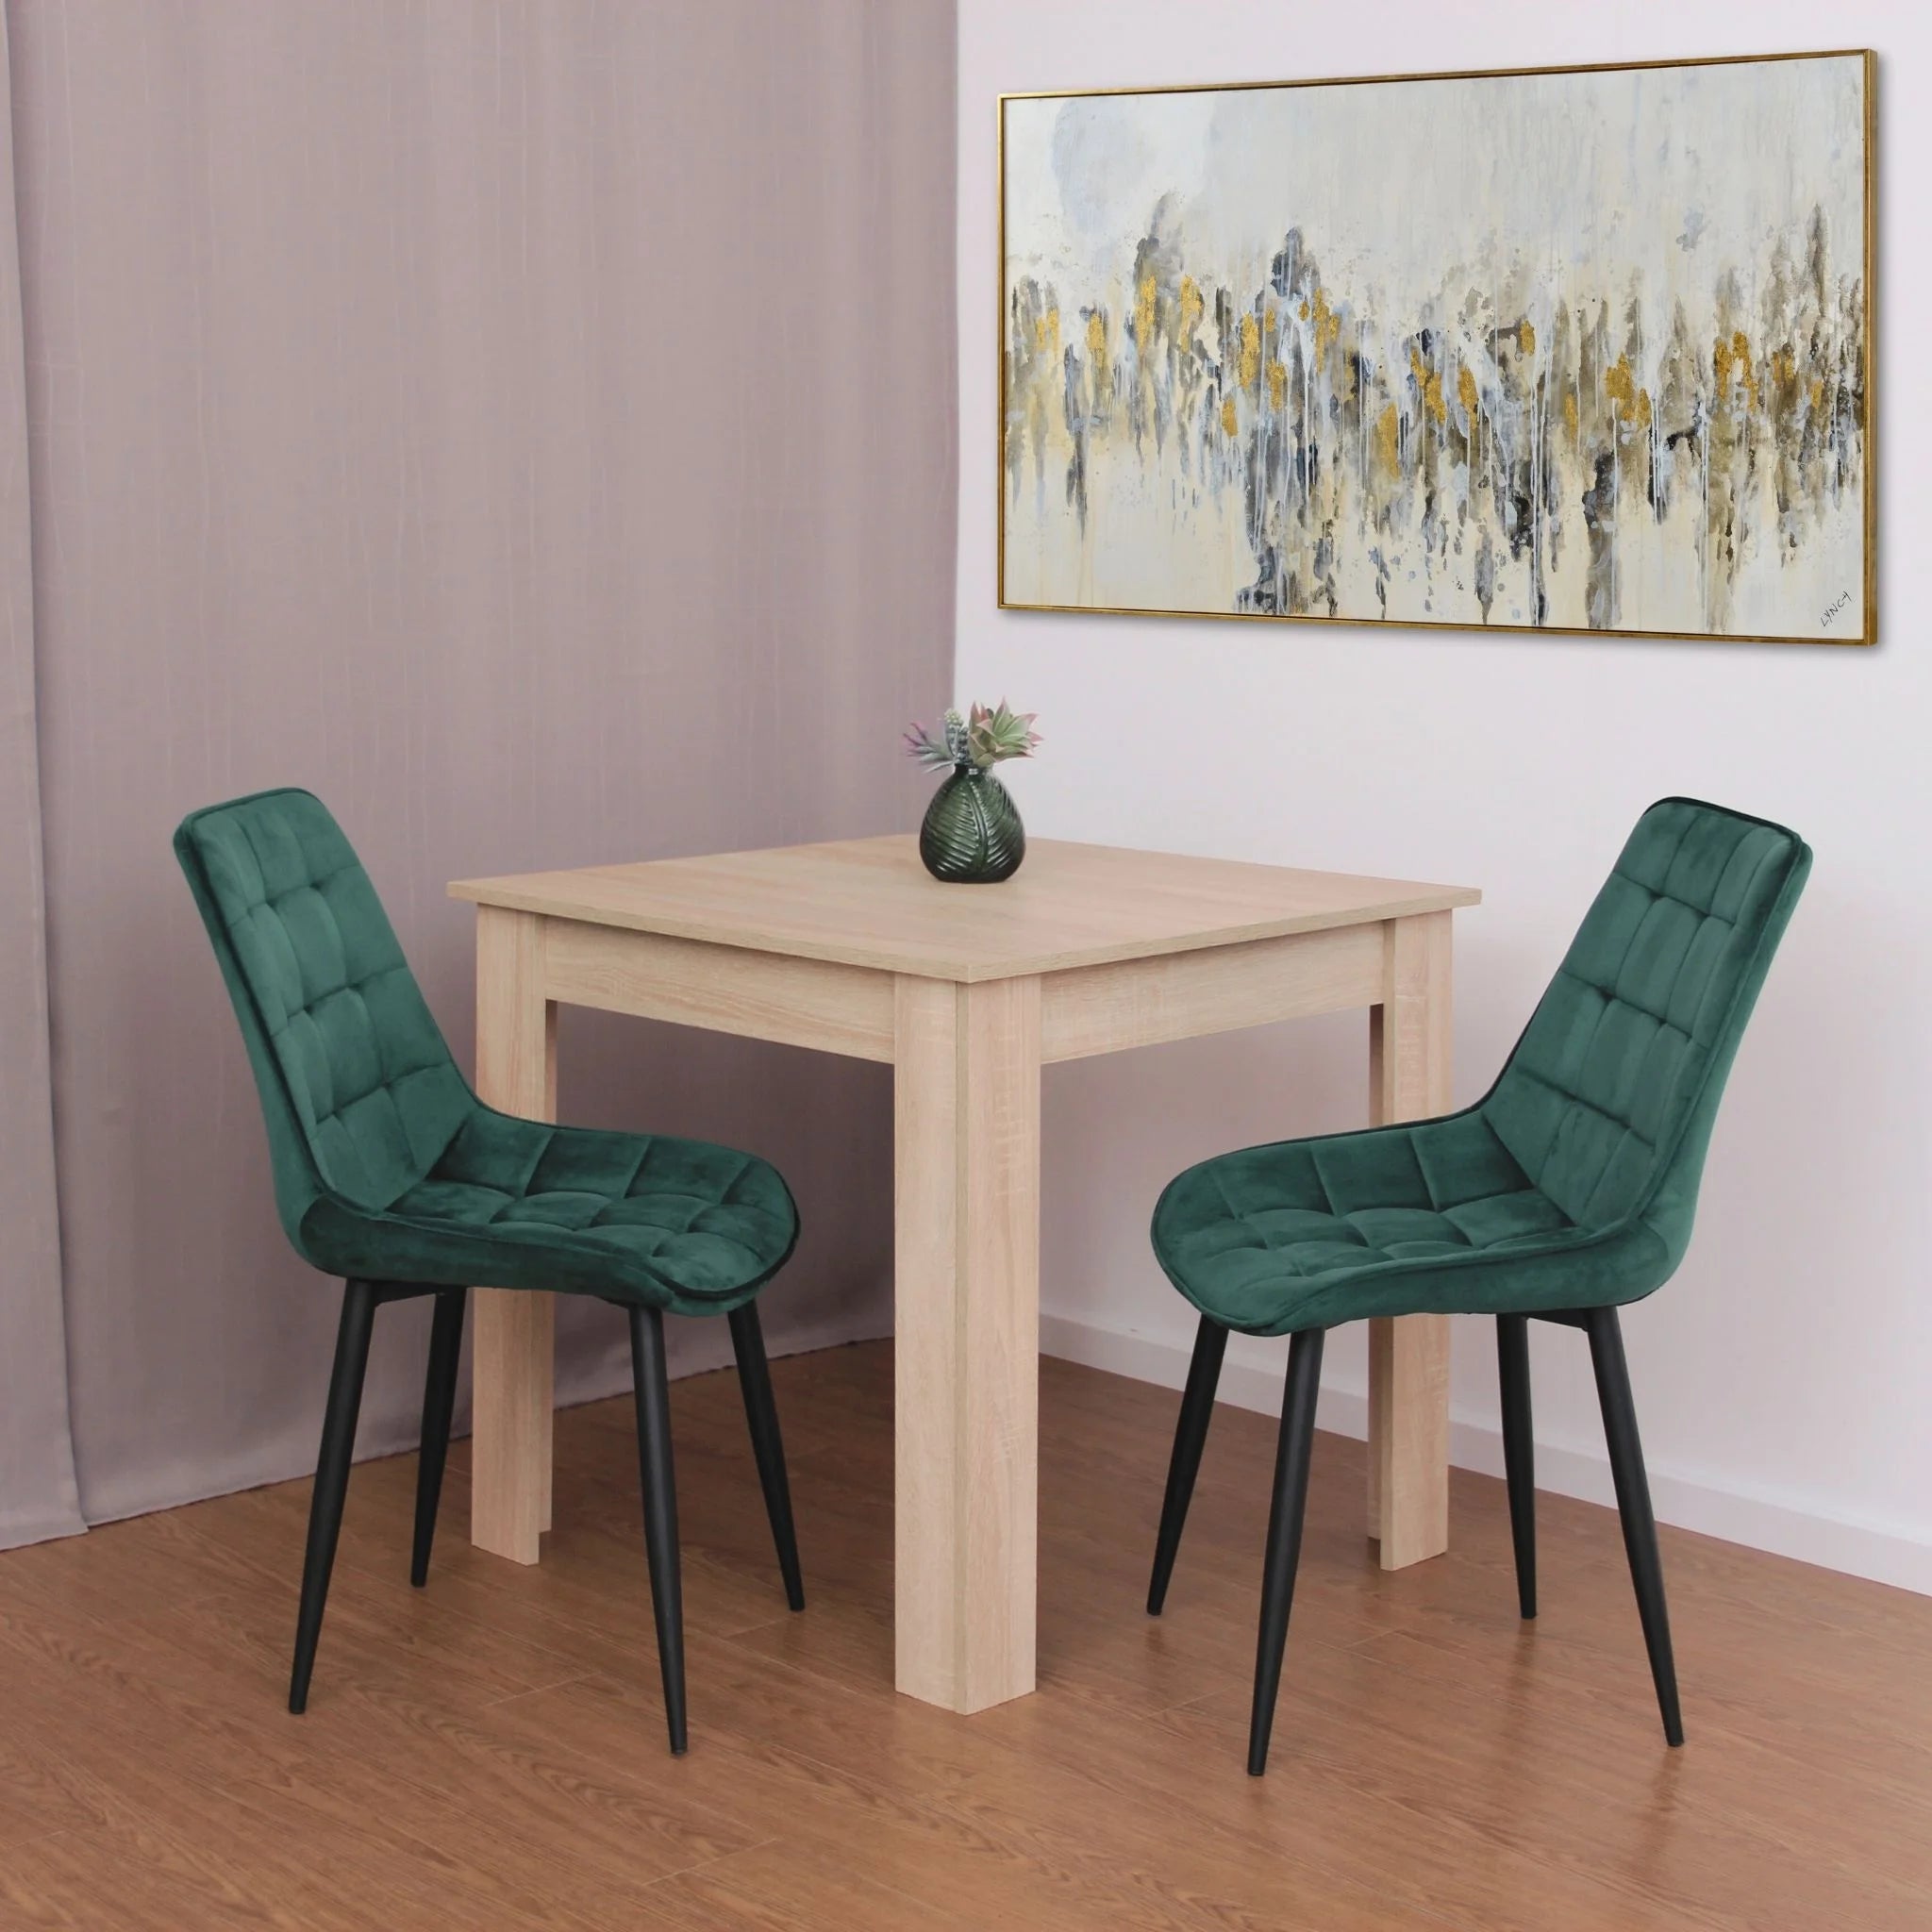 minimalist dining setup featuring green velvet chairs on brown wood effect flooring